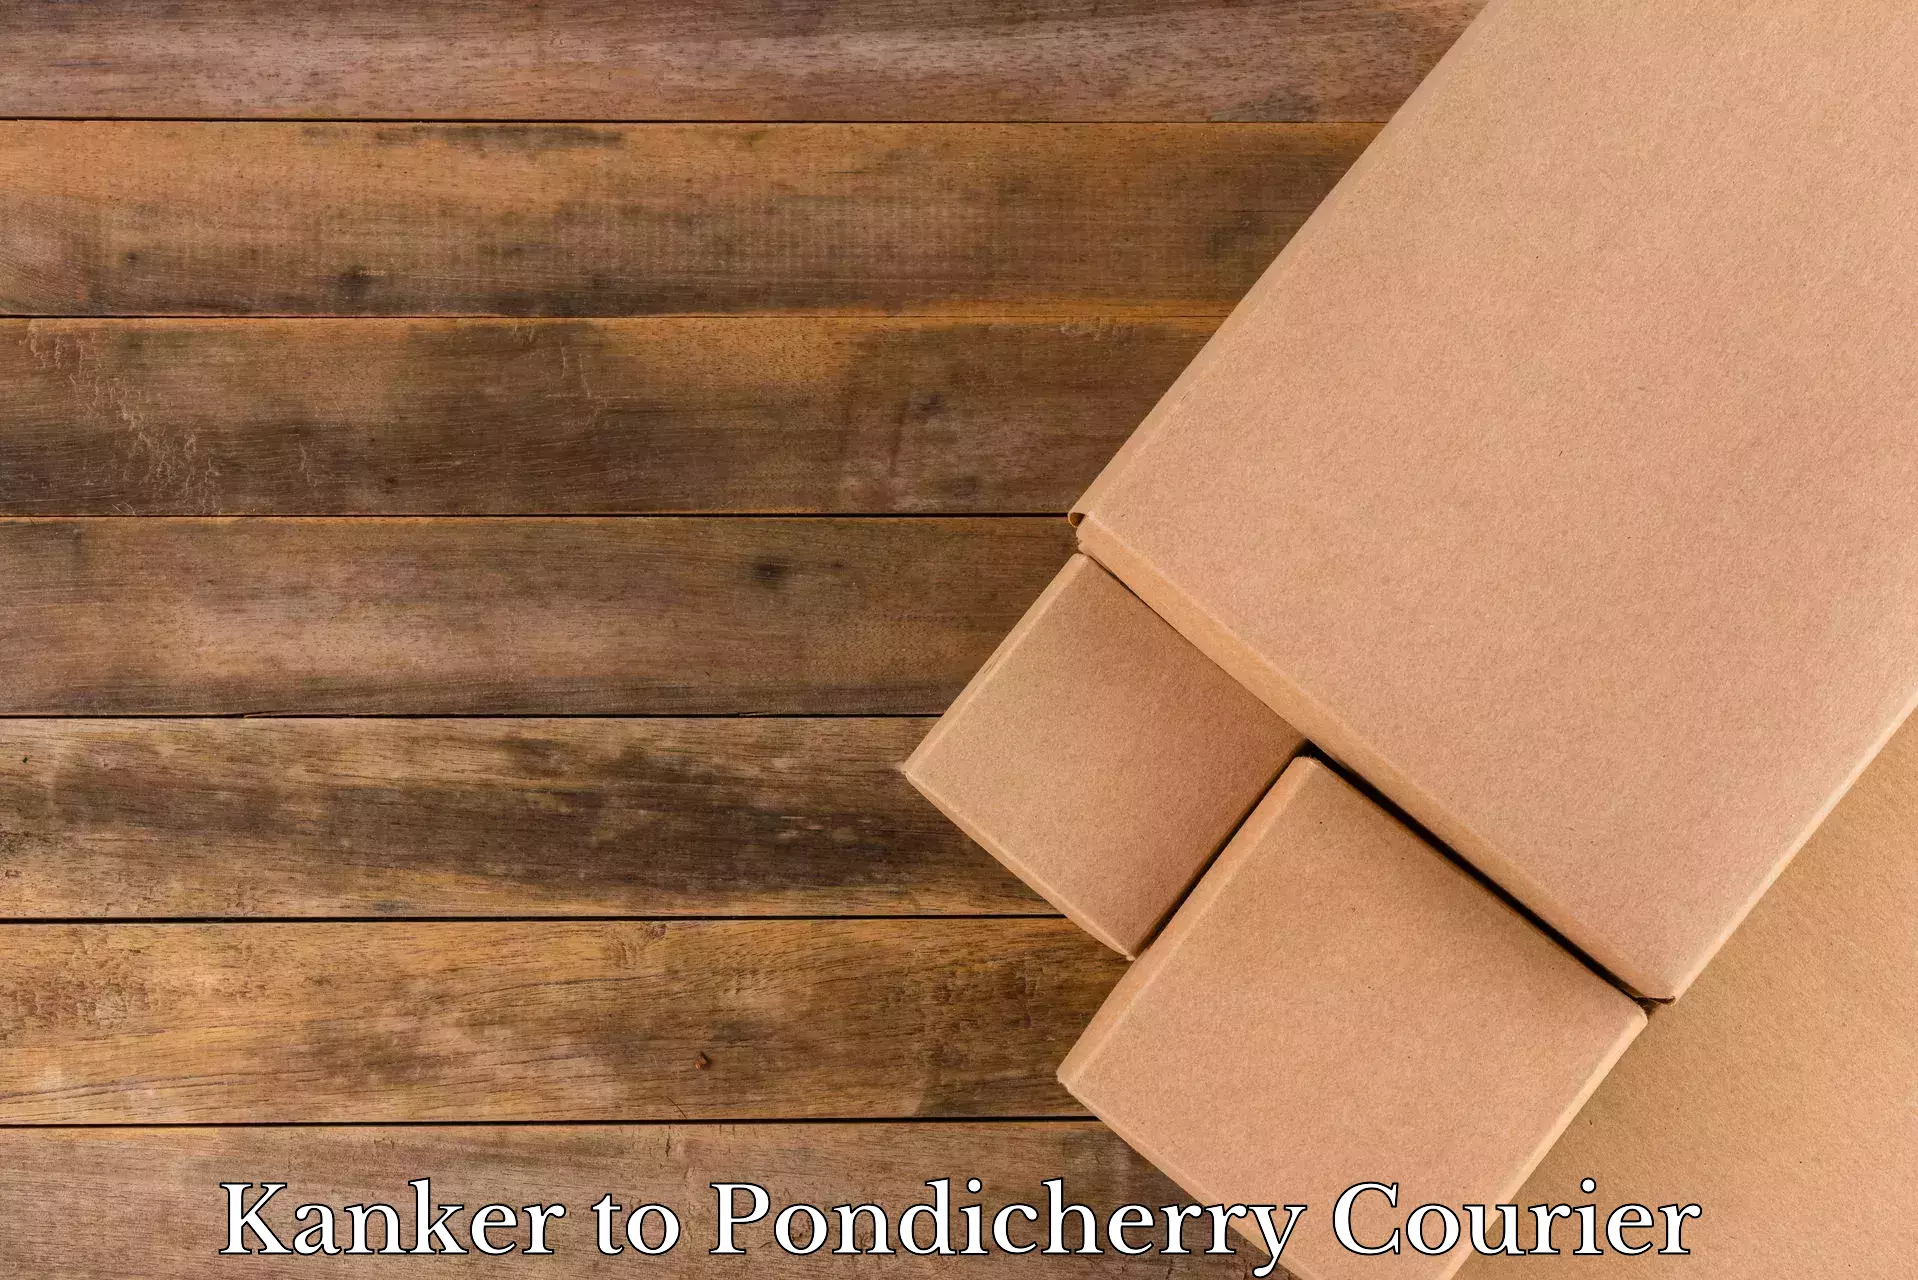 Home relocation experts Kanker to Pondicherry